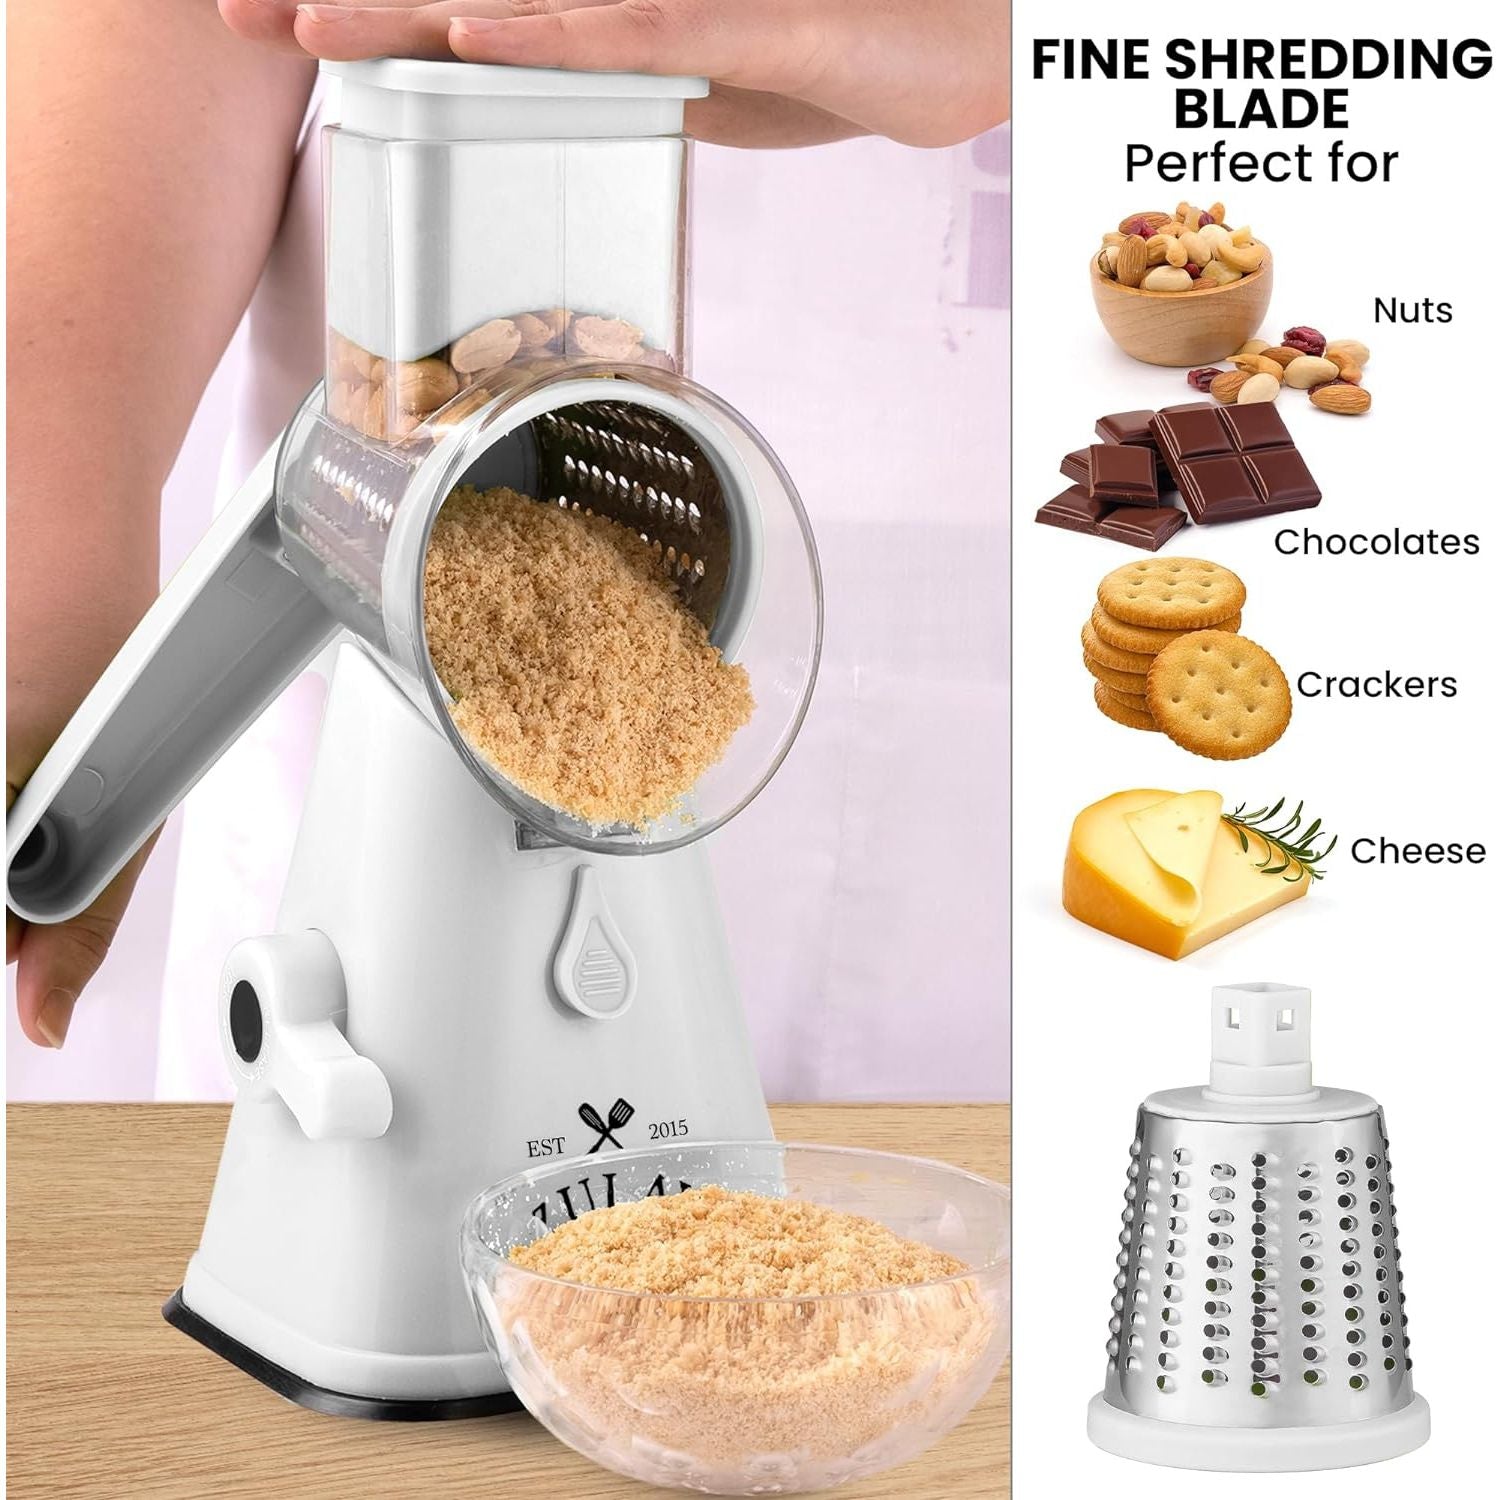 Zulay Rotary Cheese Grater with 3 Replaceable Stainless Steel Drum Blades